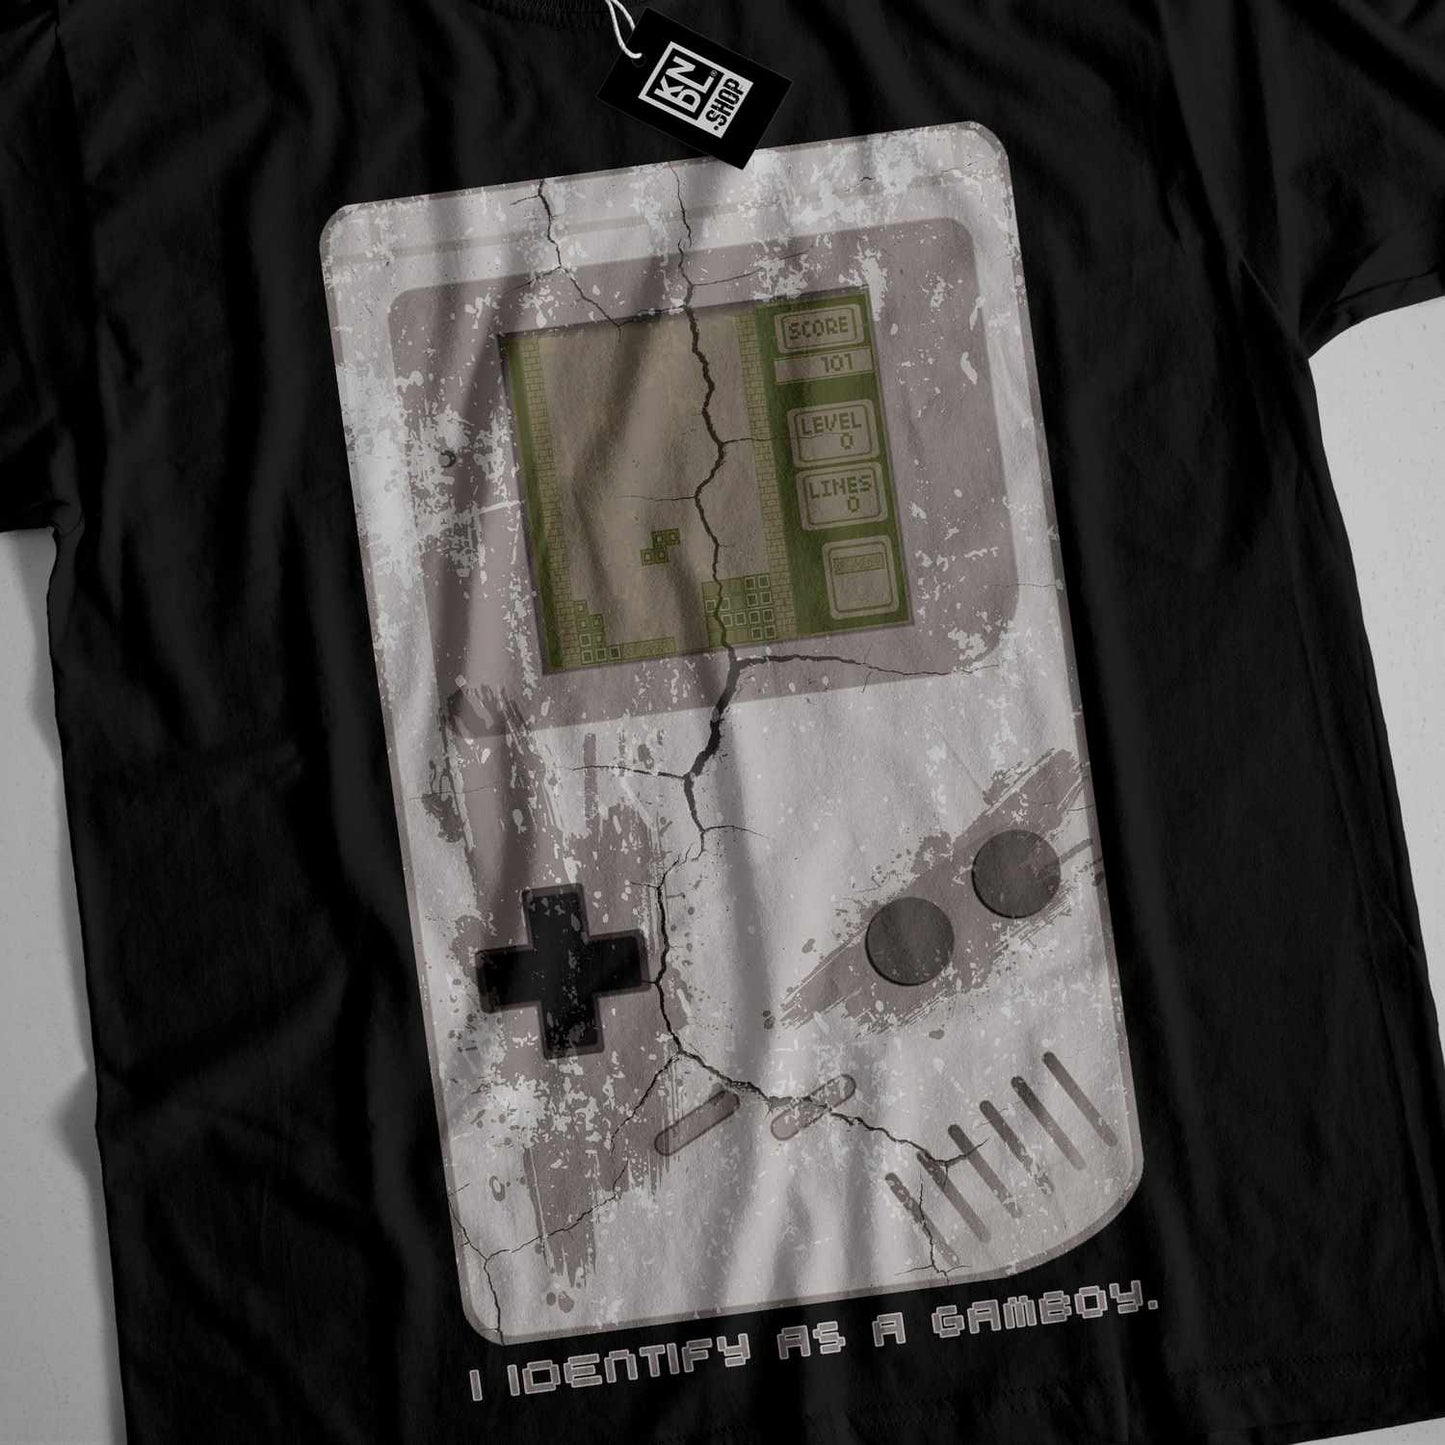 a t - shirt with a game boy on it